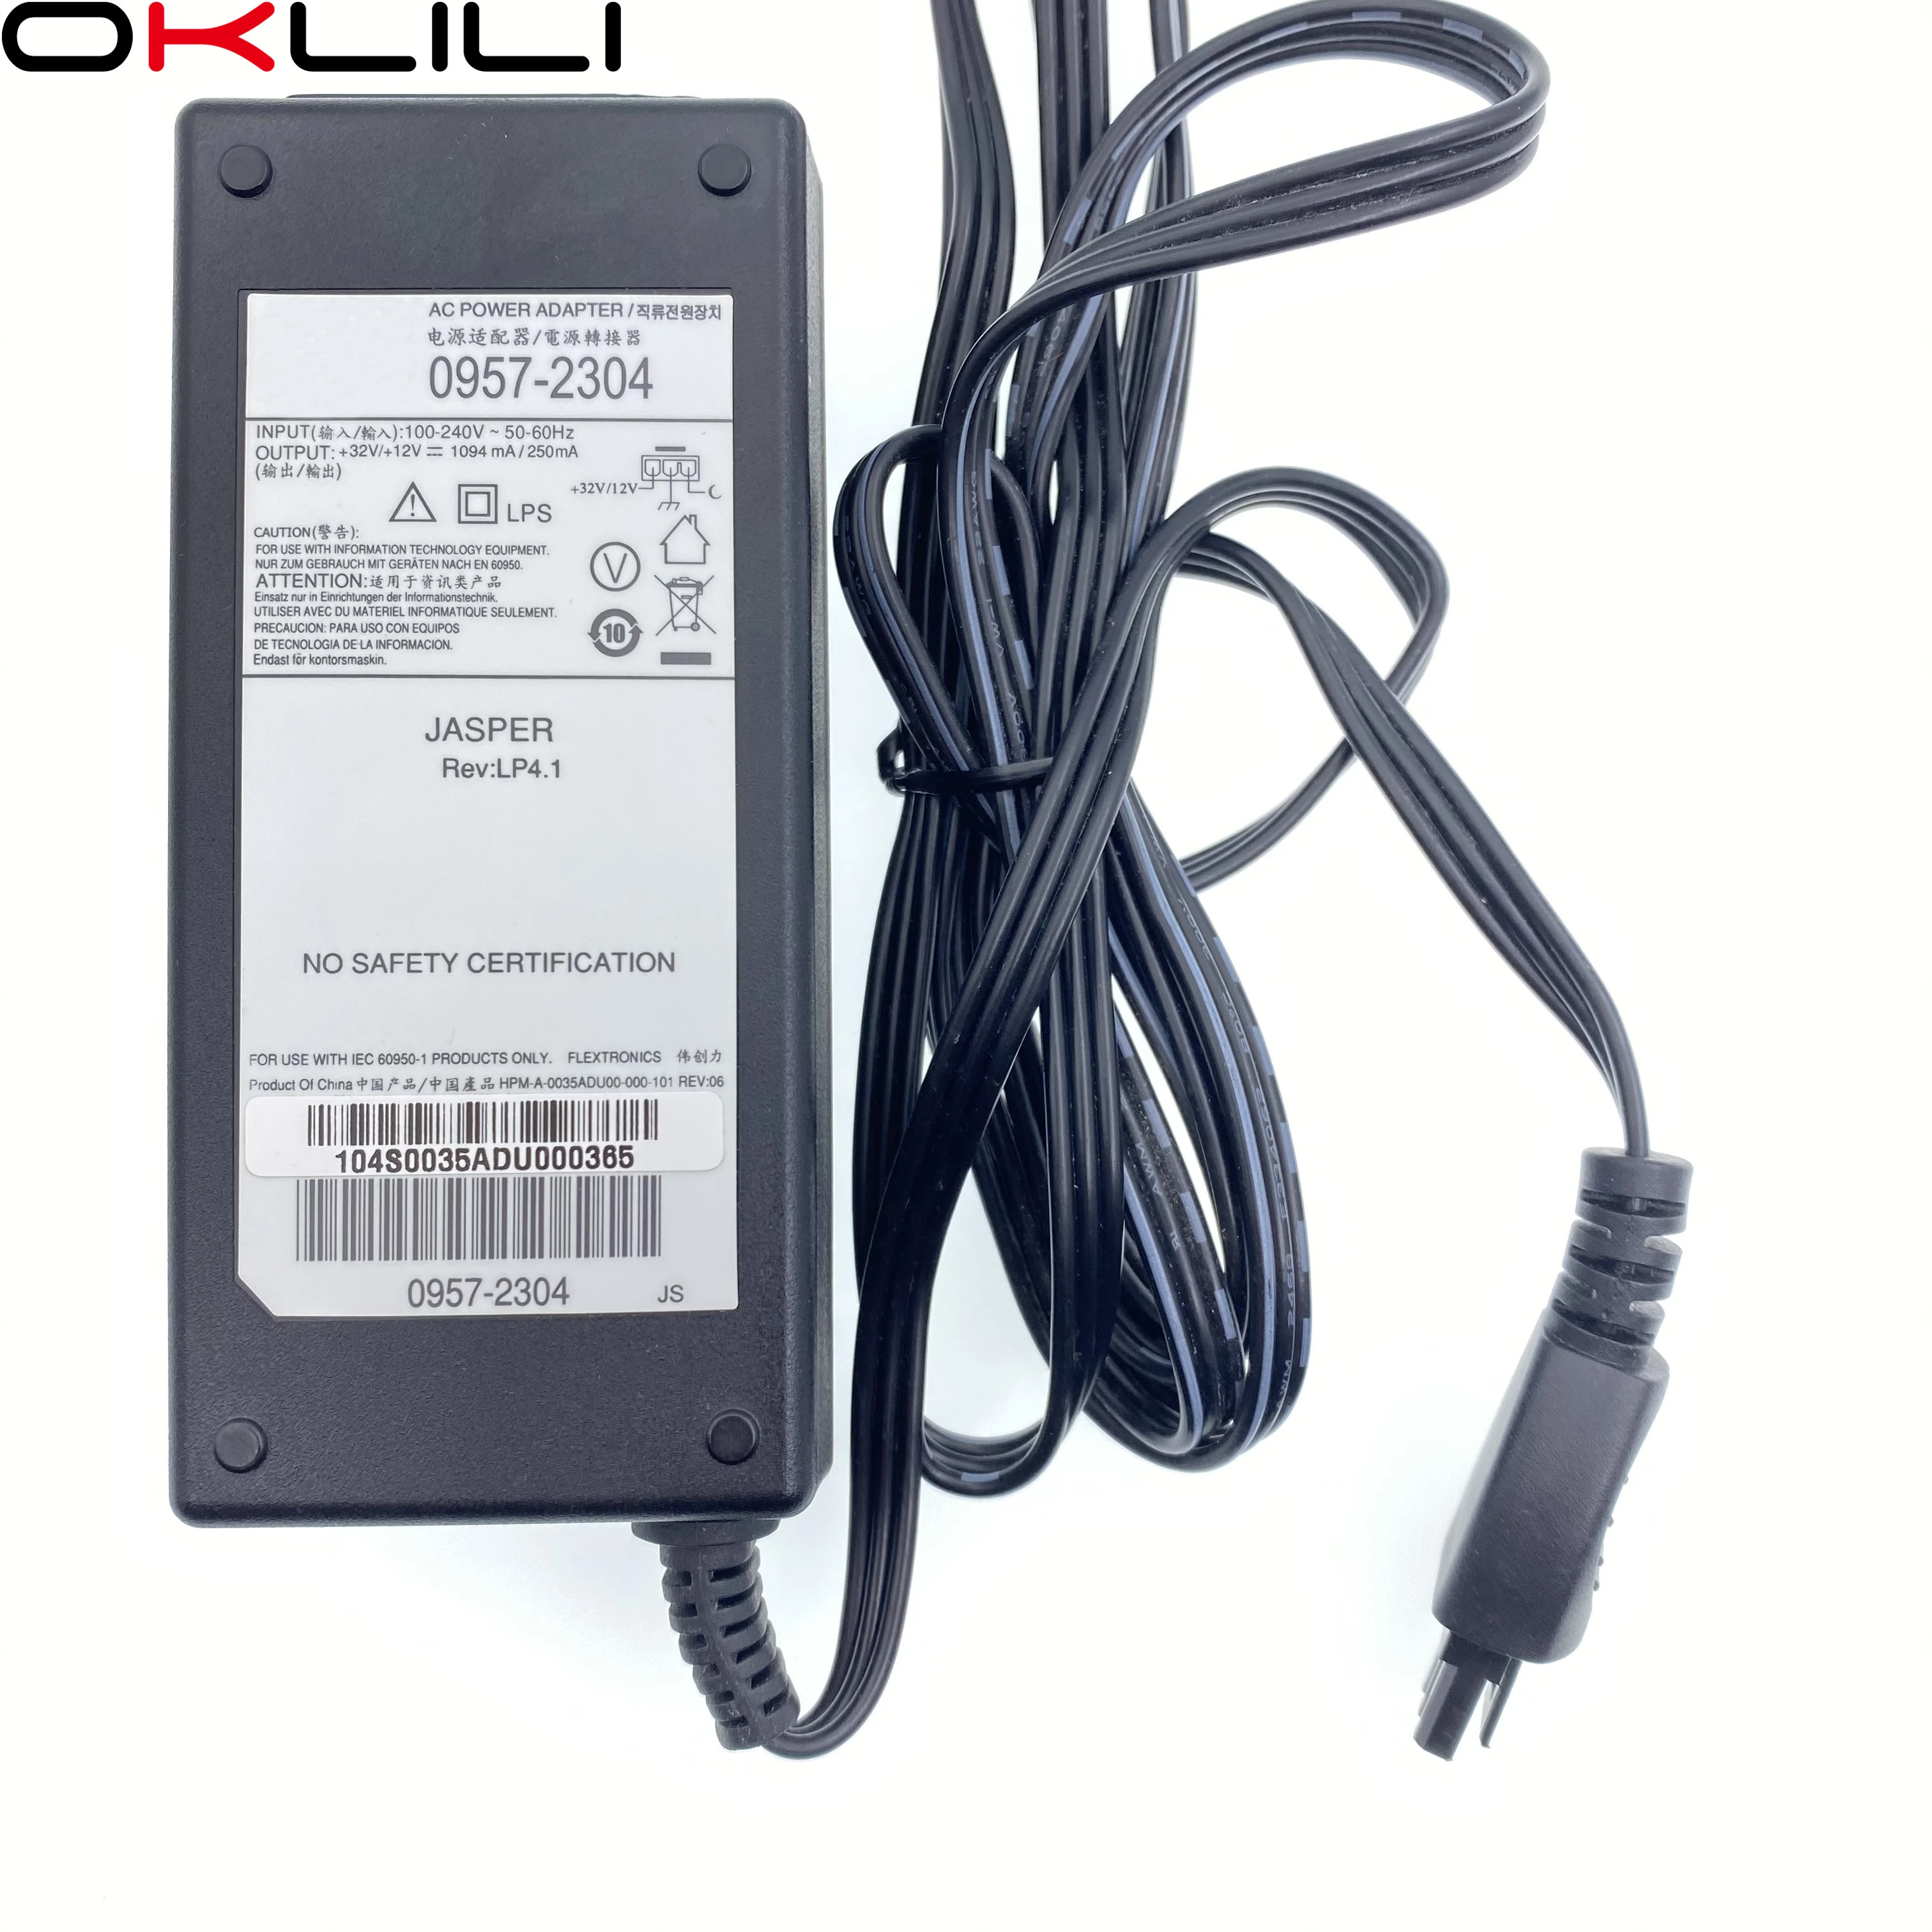 1 X 0957-2304 AC Adapter Charger Power Supply for HP Officejet 6100 6600 6700 7110 7610 7612 3610 3620 Photosmart 7510 7515 7520 printer chip Printer Parts